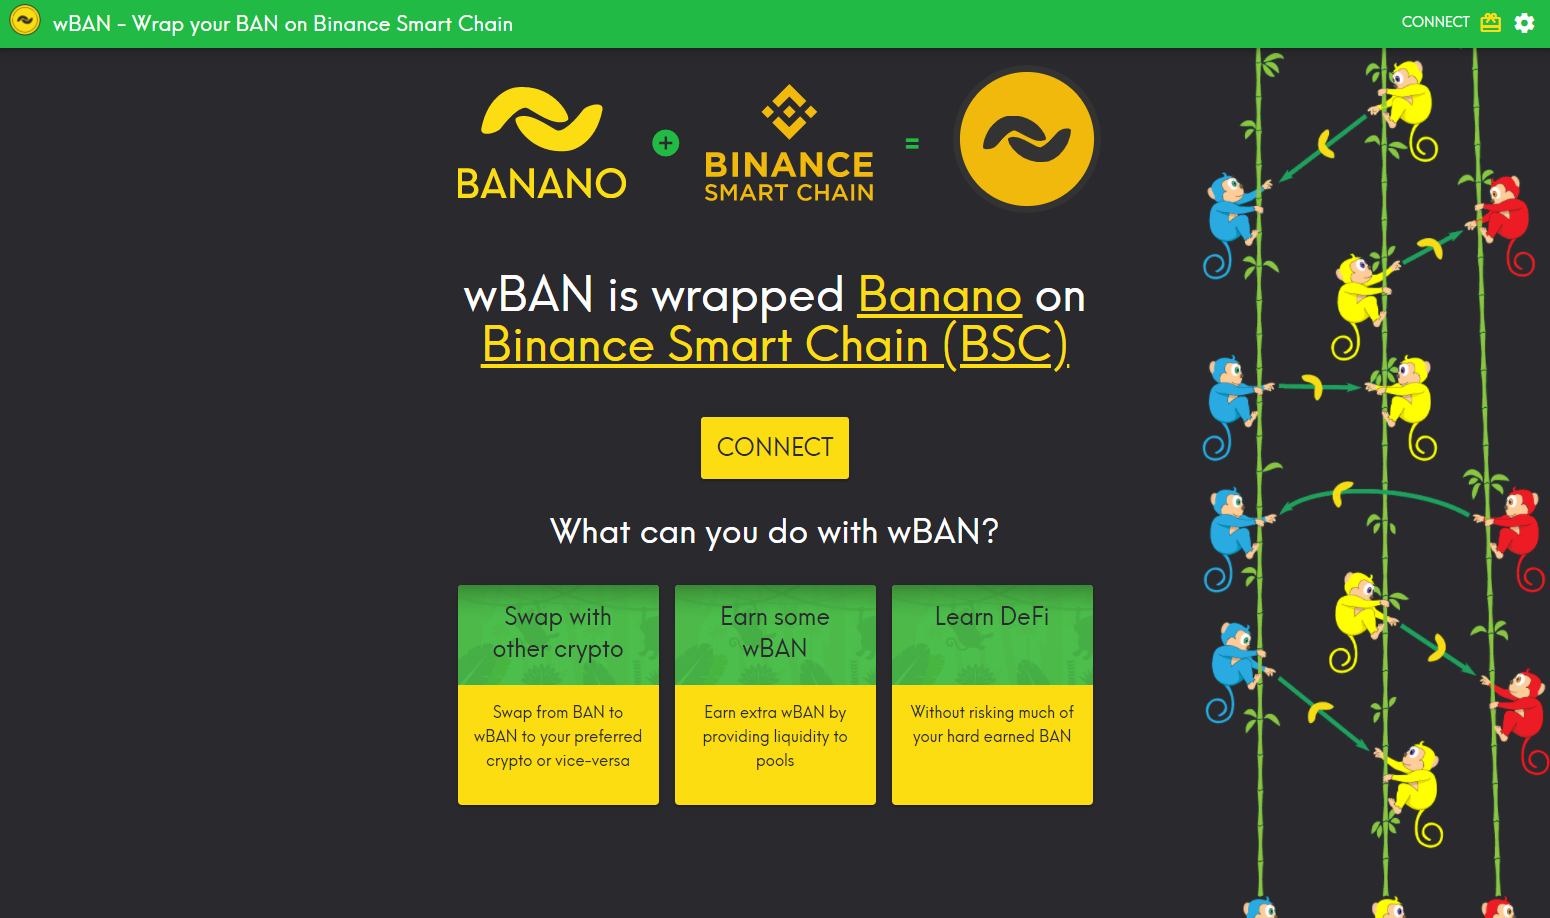 Wrapped BANANO (wBAN) update for August 28, 2021 to September 25, 2021